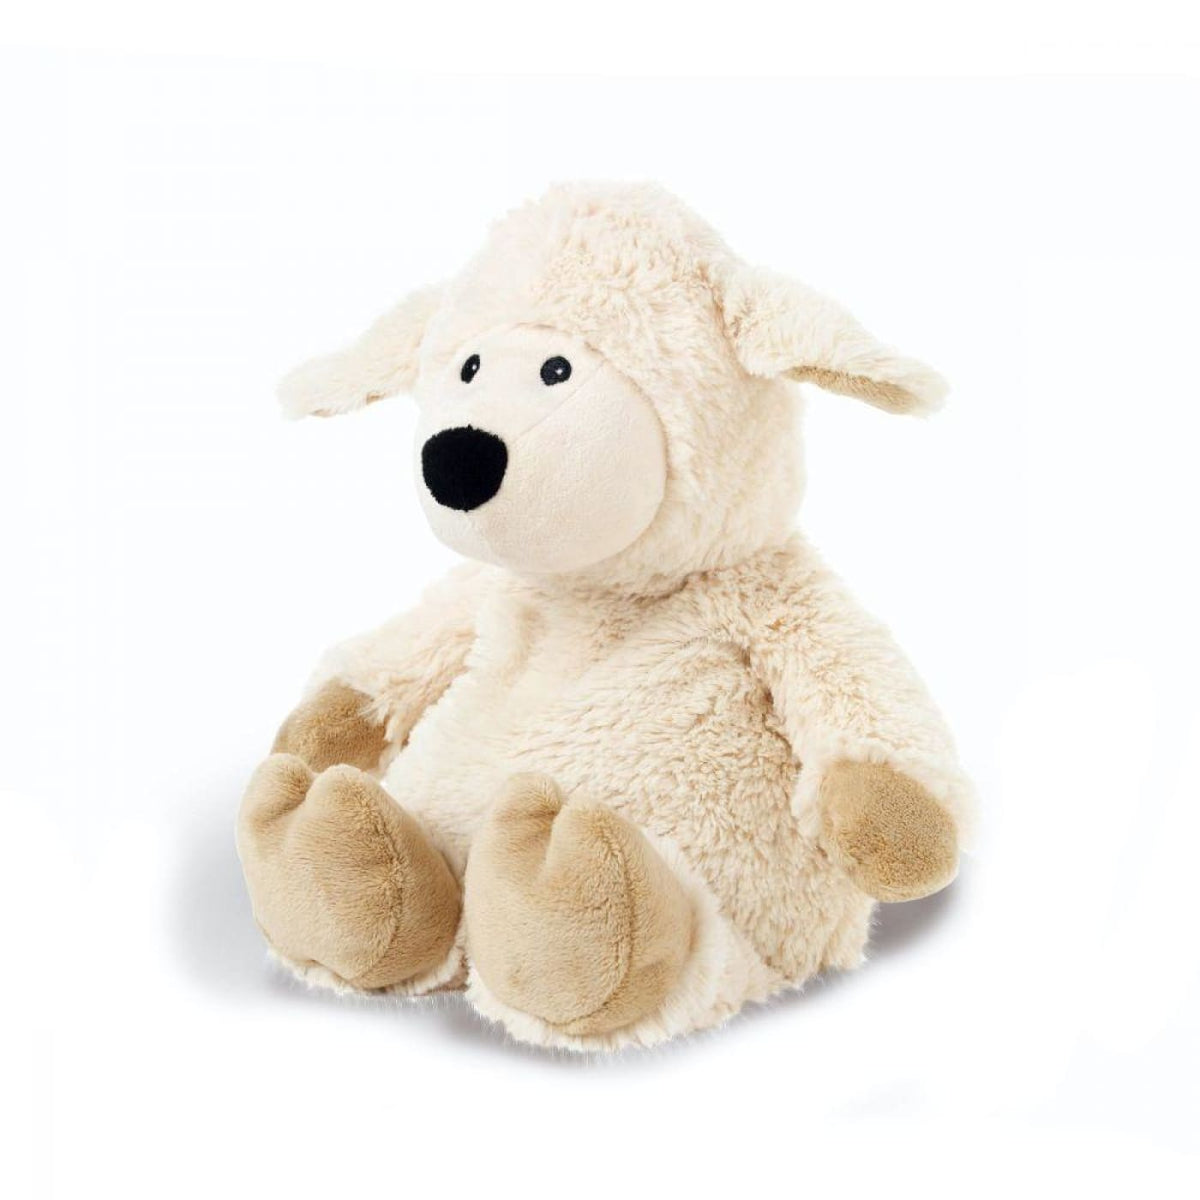 Warmies Cozy Plush - Sheep - Sheep - HEALTH &amp; HOME SAFETY - THERMOMETERS/MEDICINAL